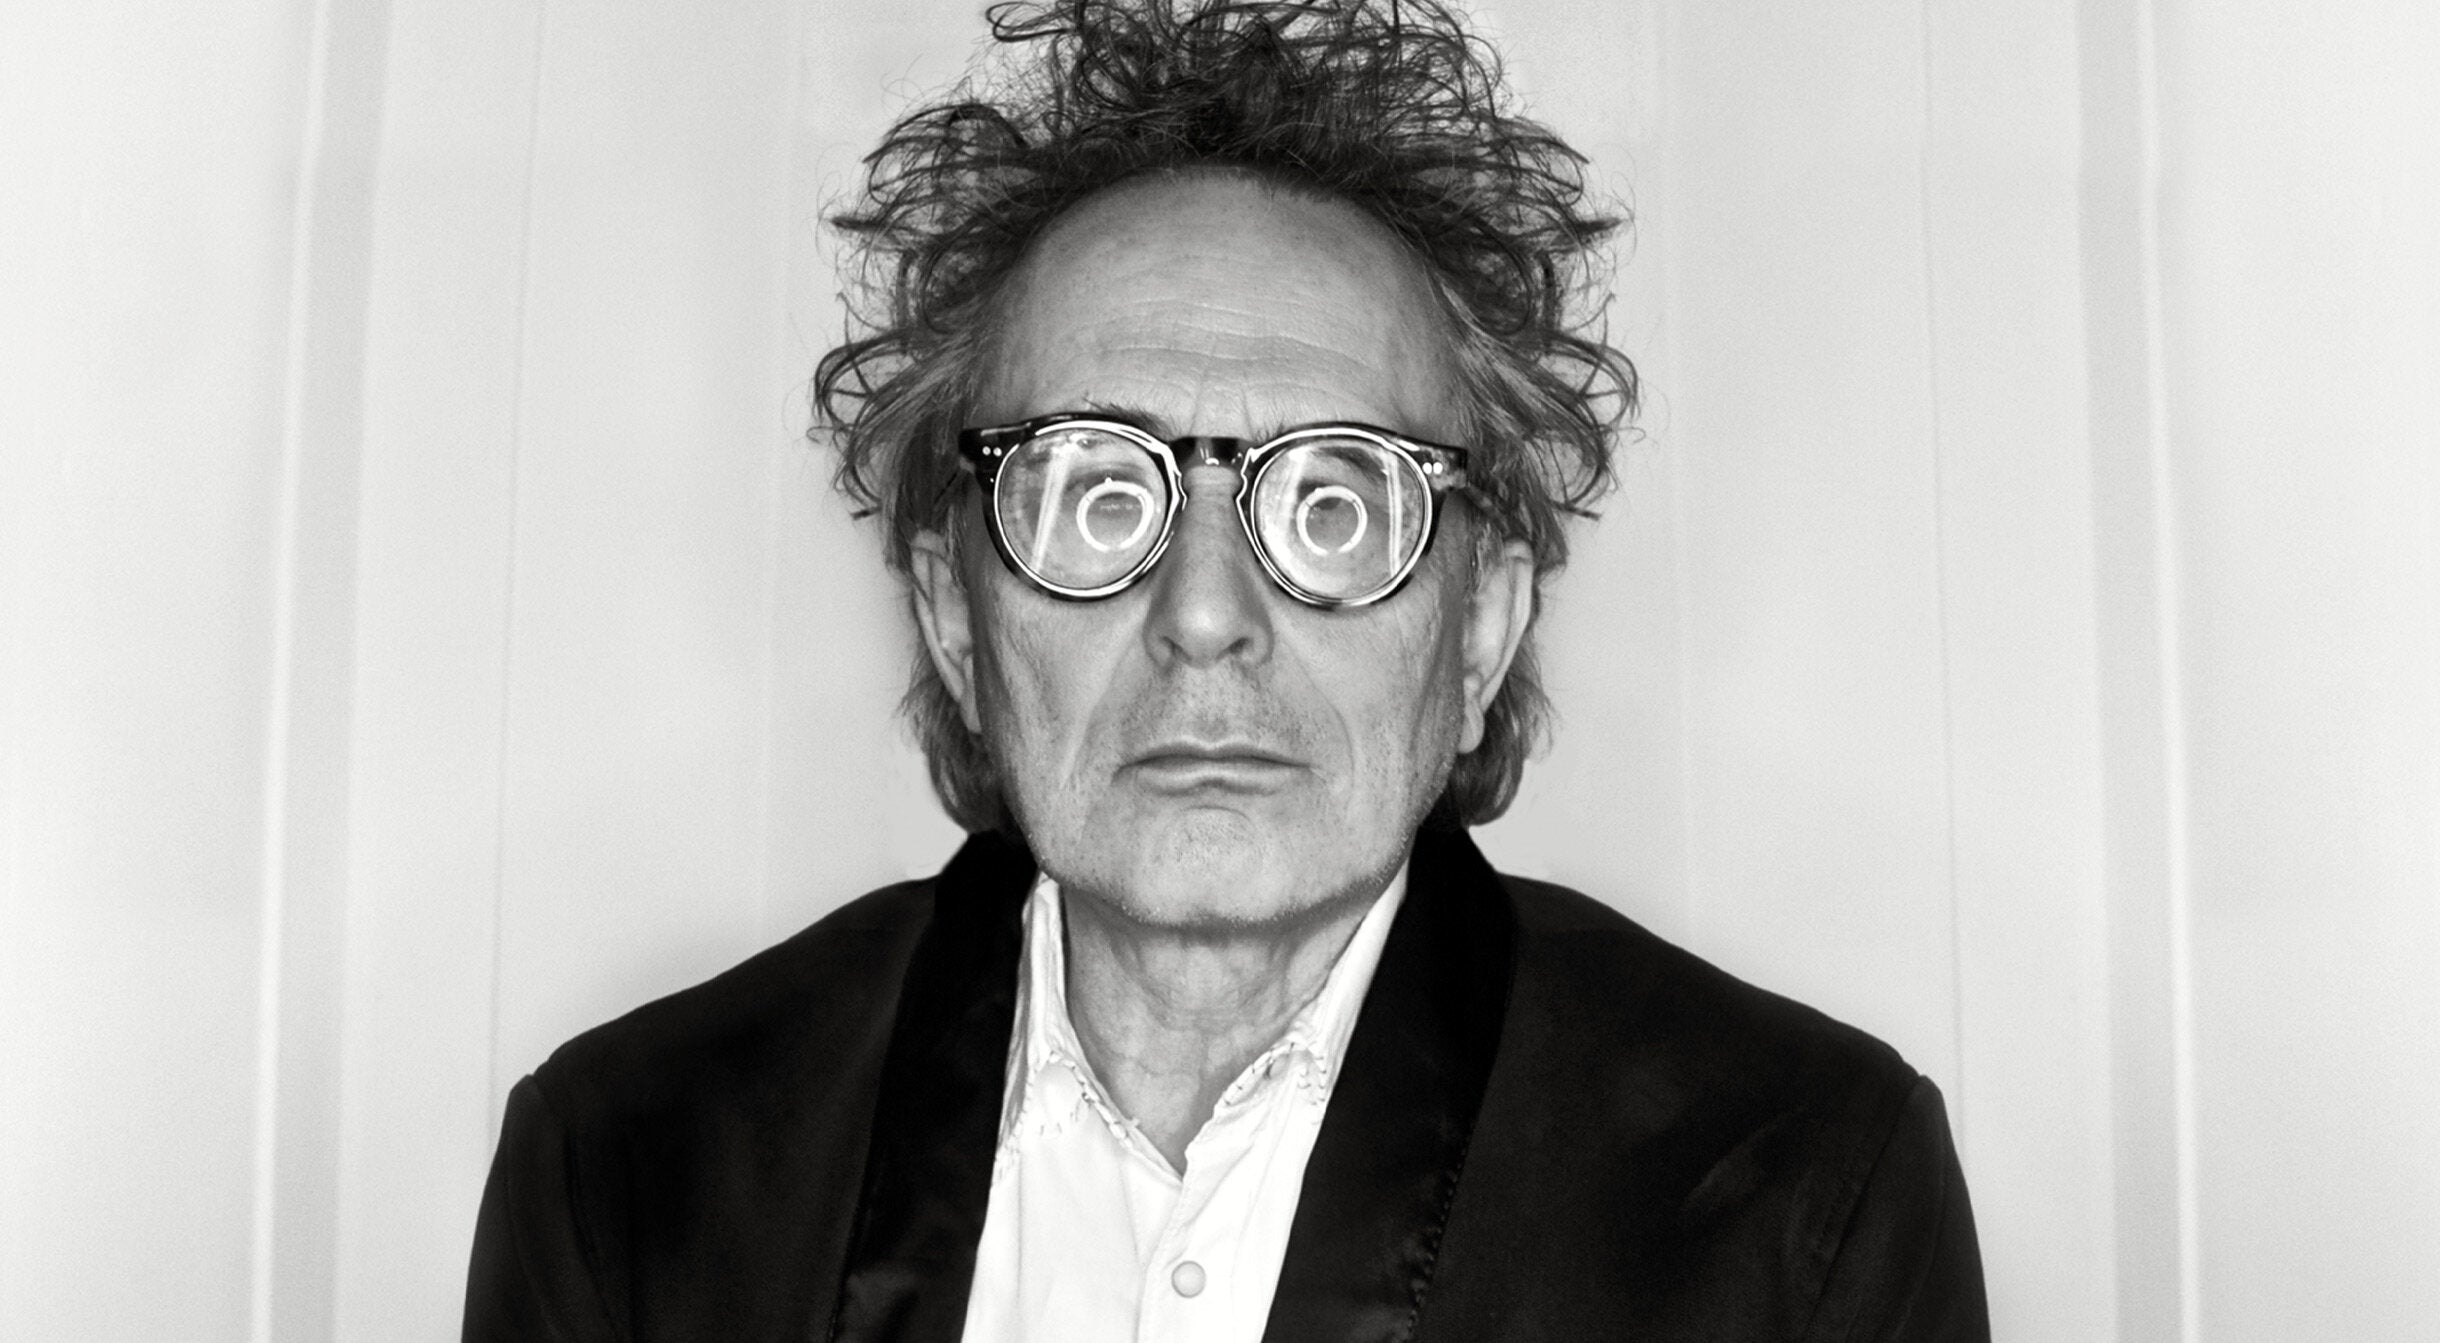 Black and white portrait musician Marc Jordan with swirl of circle light in reflection of his glasses while standing against white backdrop